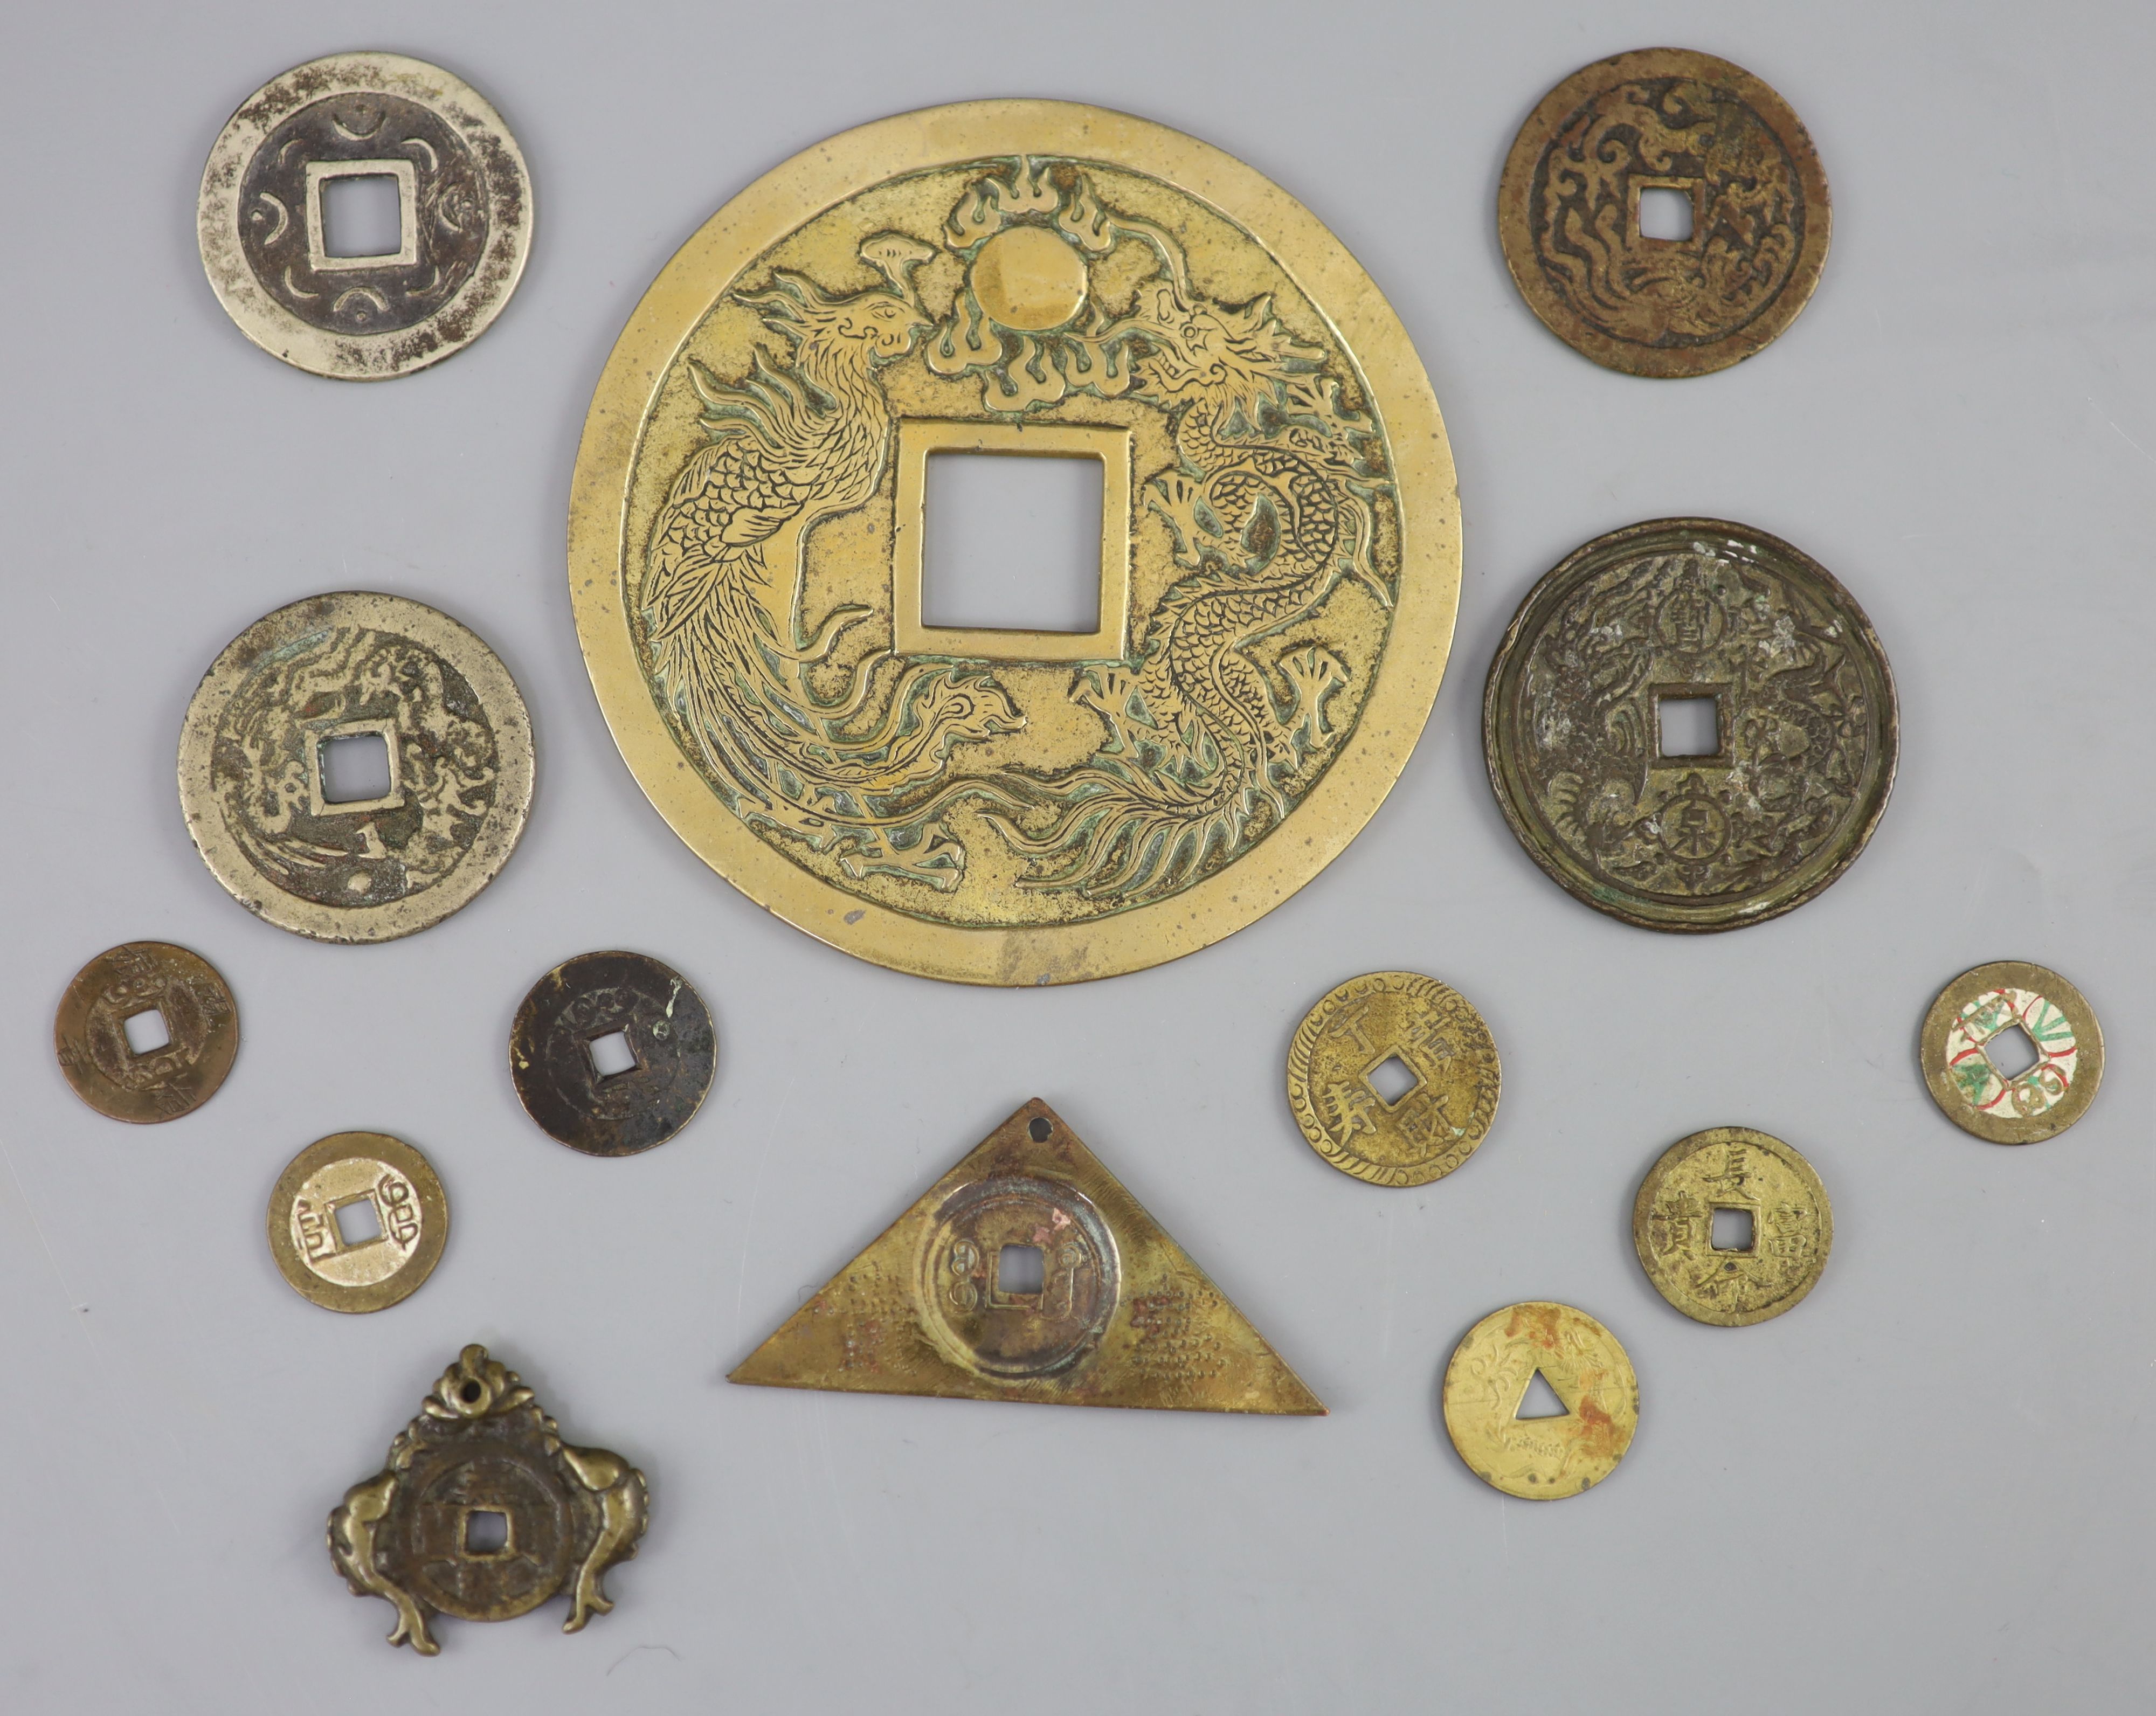 China, a group of 14 bronze and brass coin charms or amulets, Qing to Republic period, F to VF